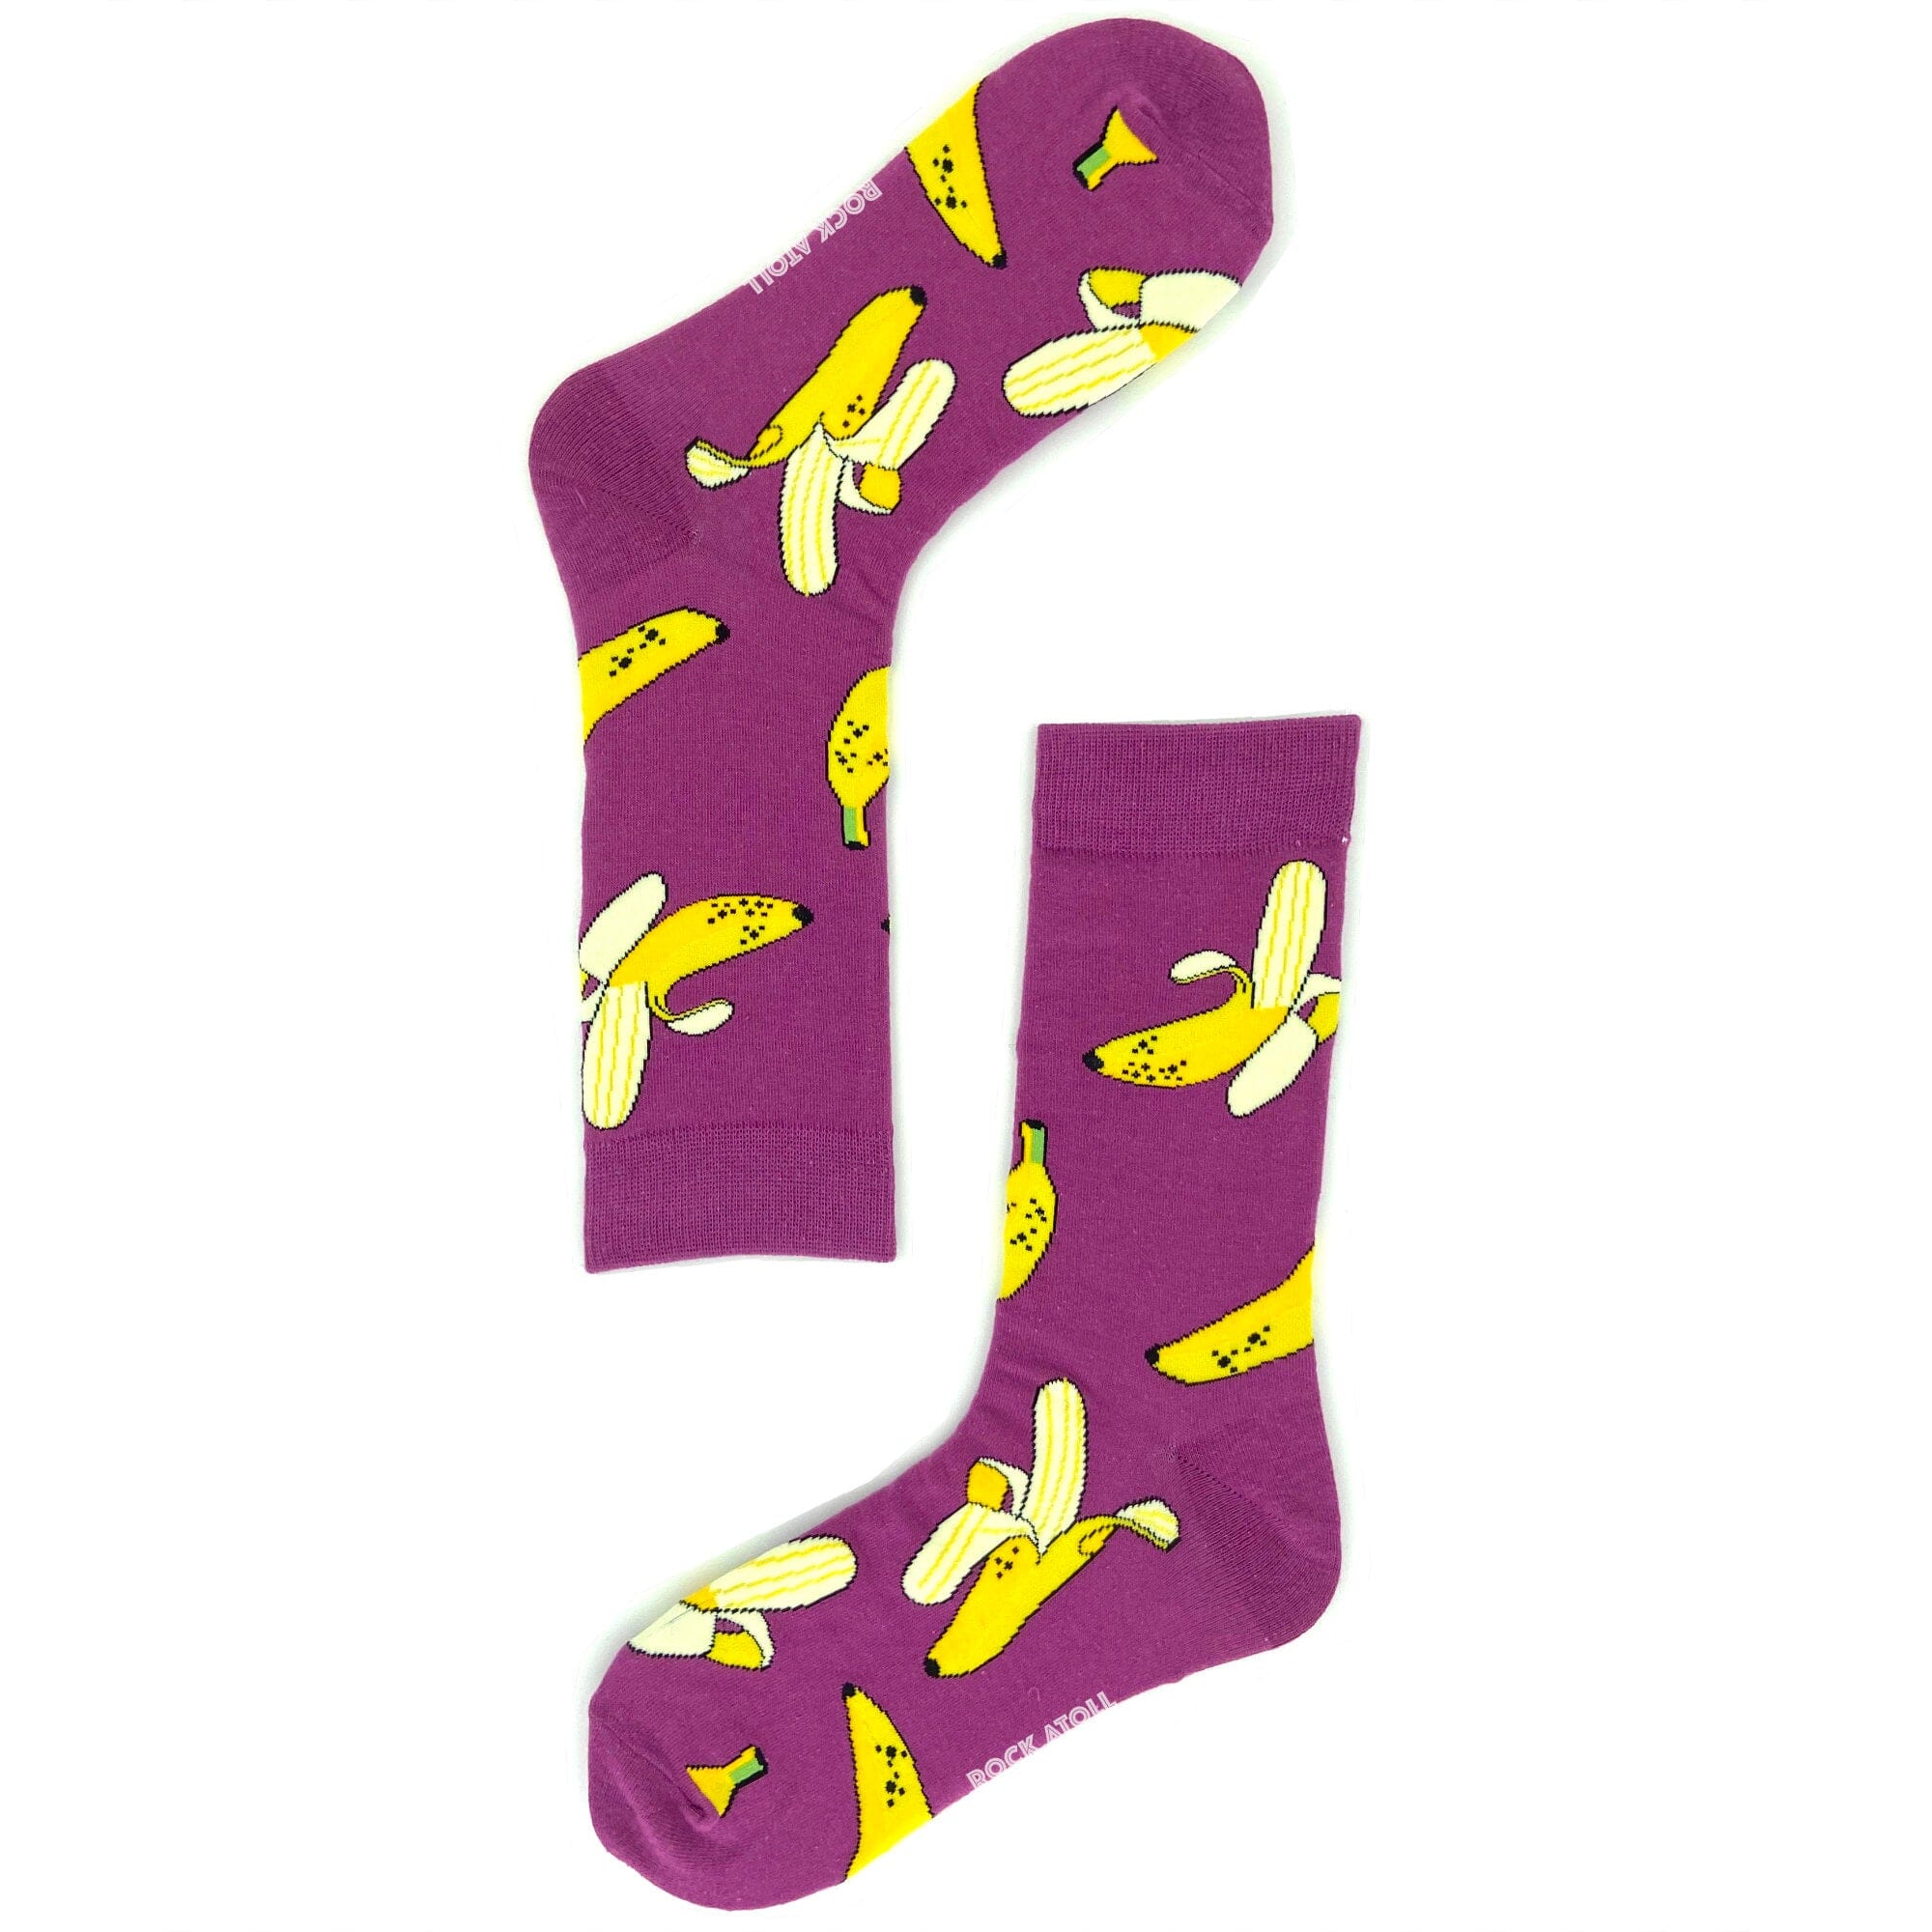 Colorful Fruity Banana Peel Patterned Durable Stretch Novelty Socks